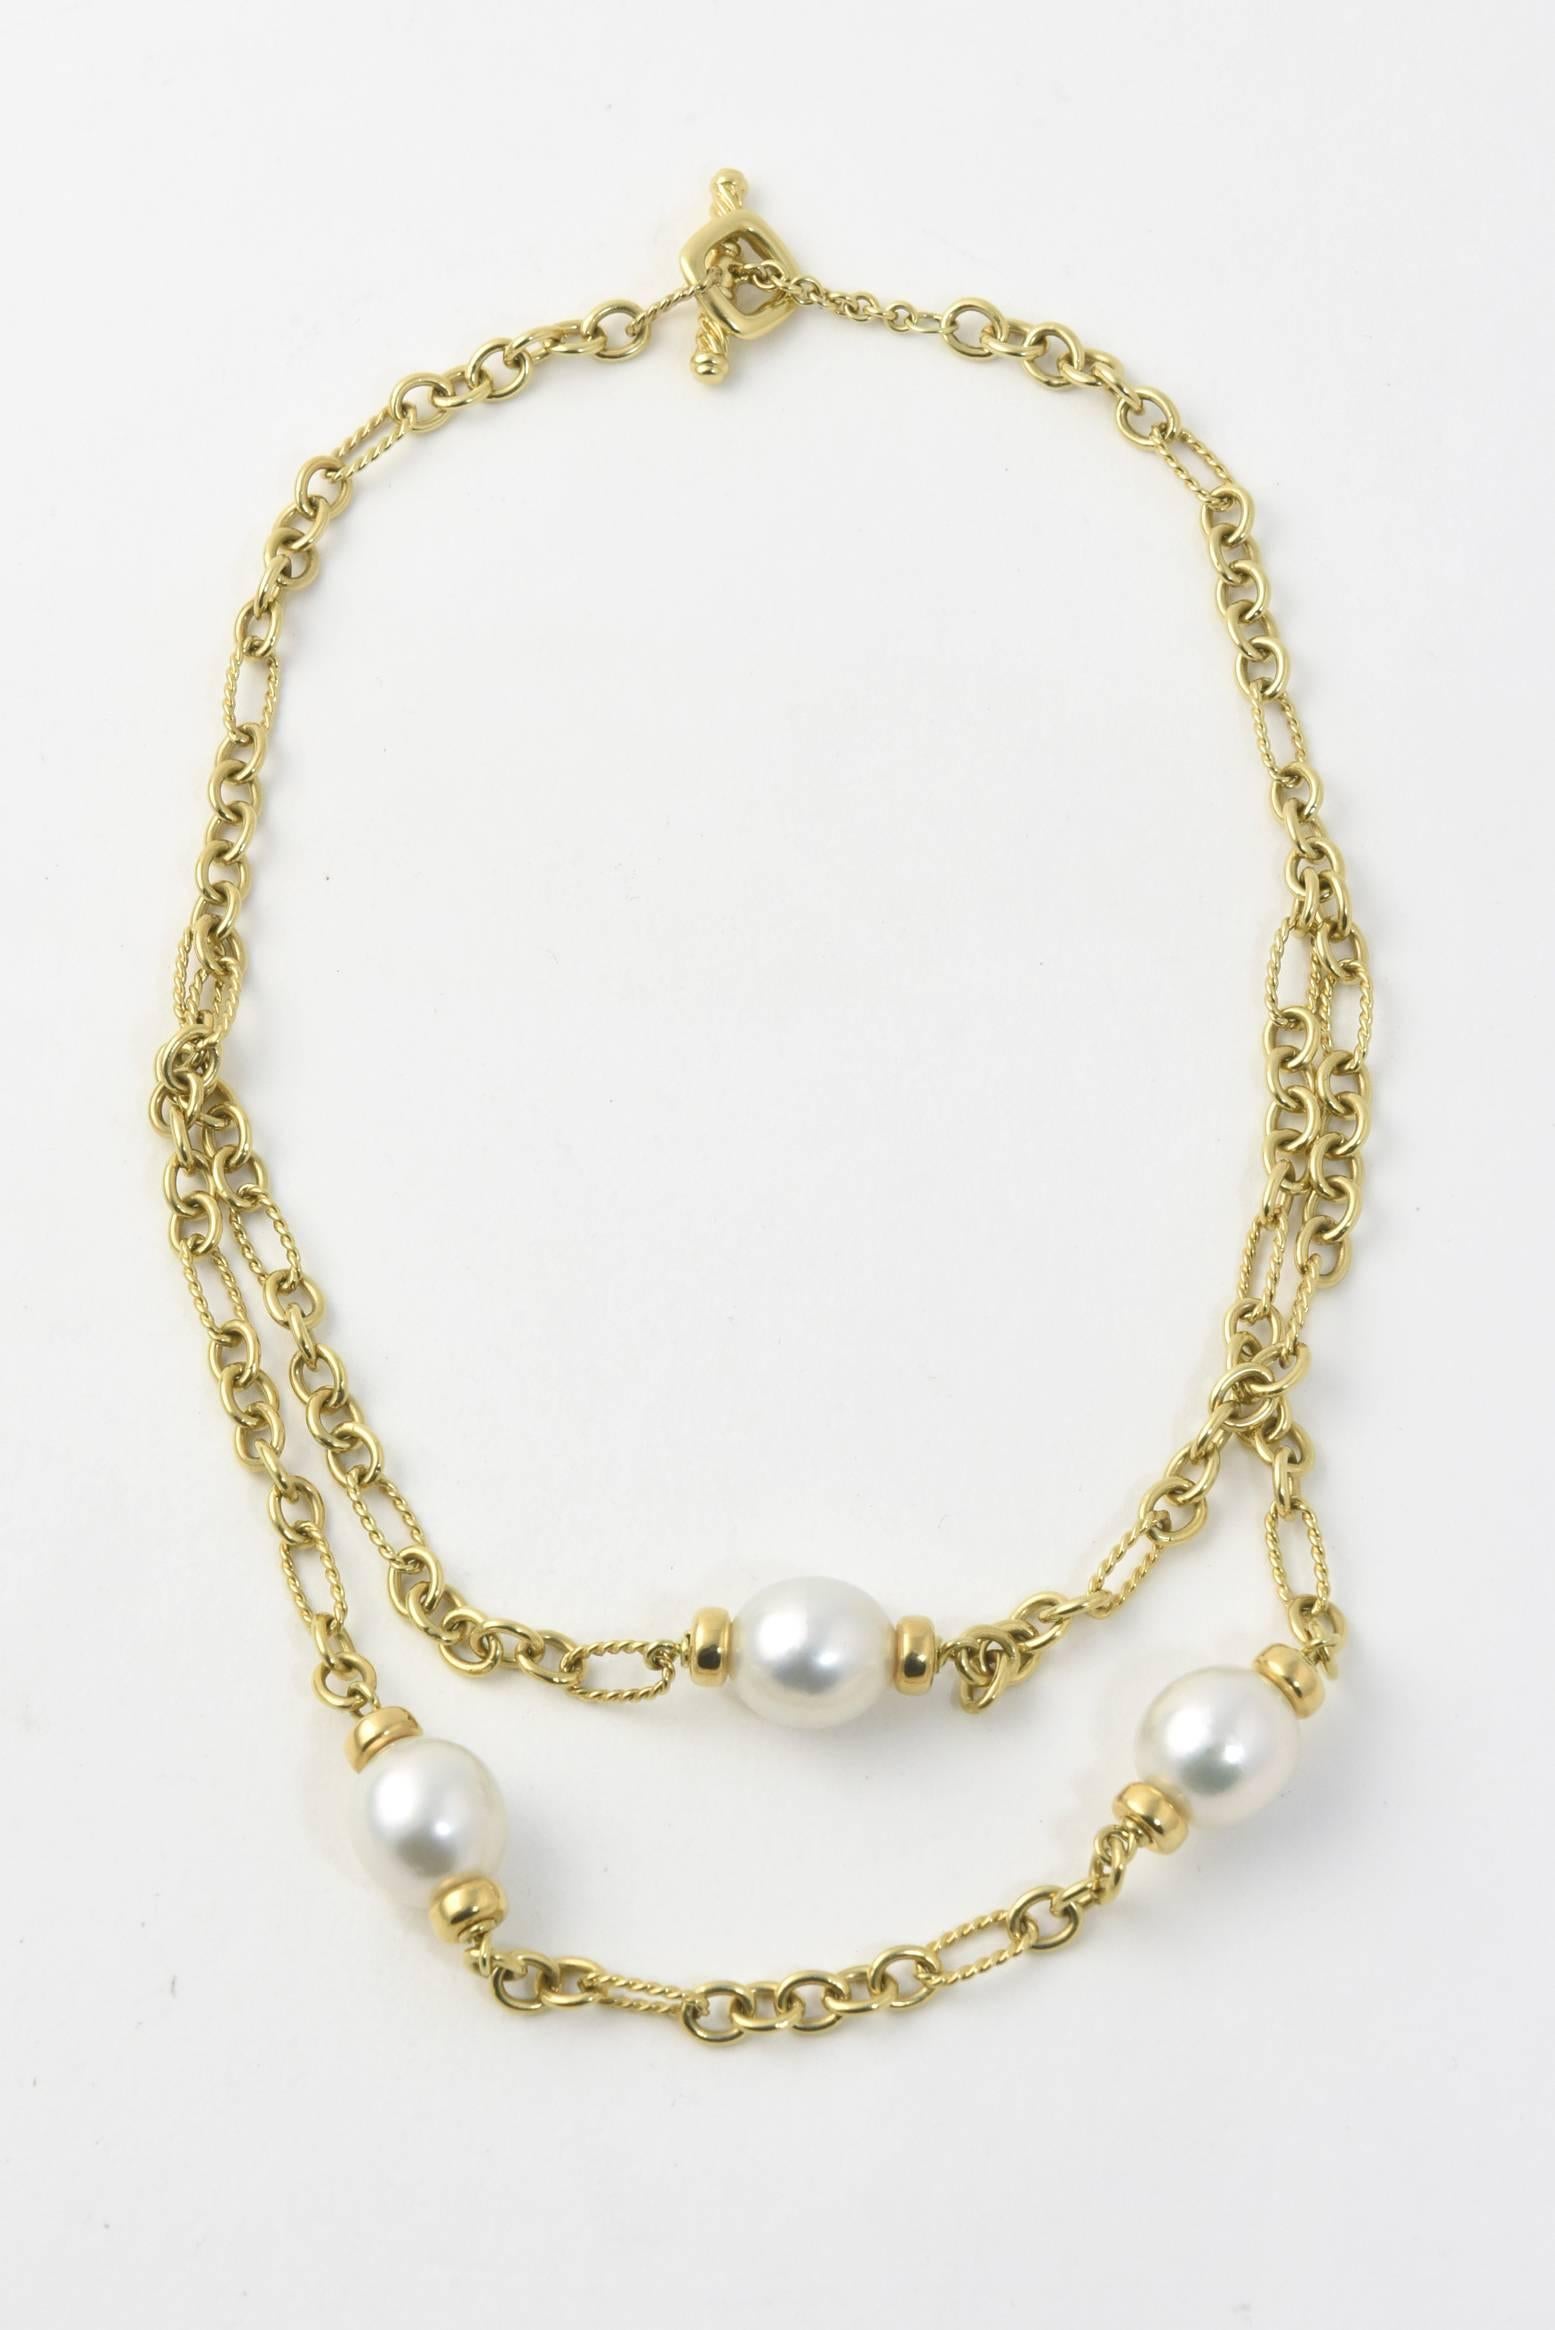 Two tier David Yurman Pearl necklace with  top layer featuring a 12.5mm plus pearl center with gold caps hanging on a chain with oval cable links and smooth chain link terminating in a toggle clasp.  The bottom tier has 2 more pearls that are spaced